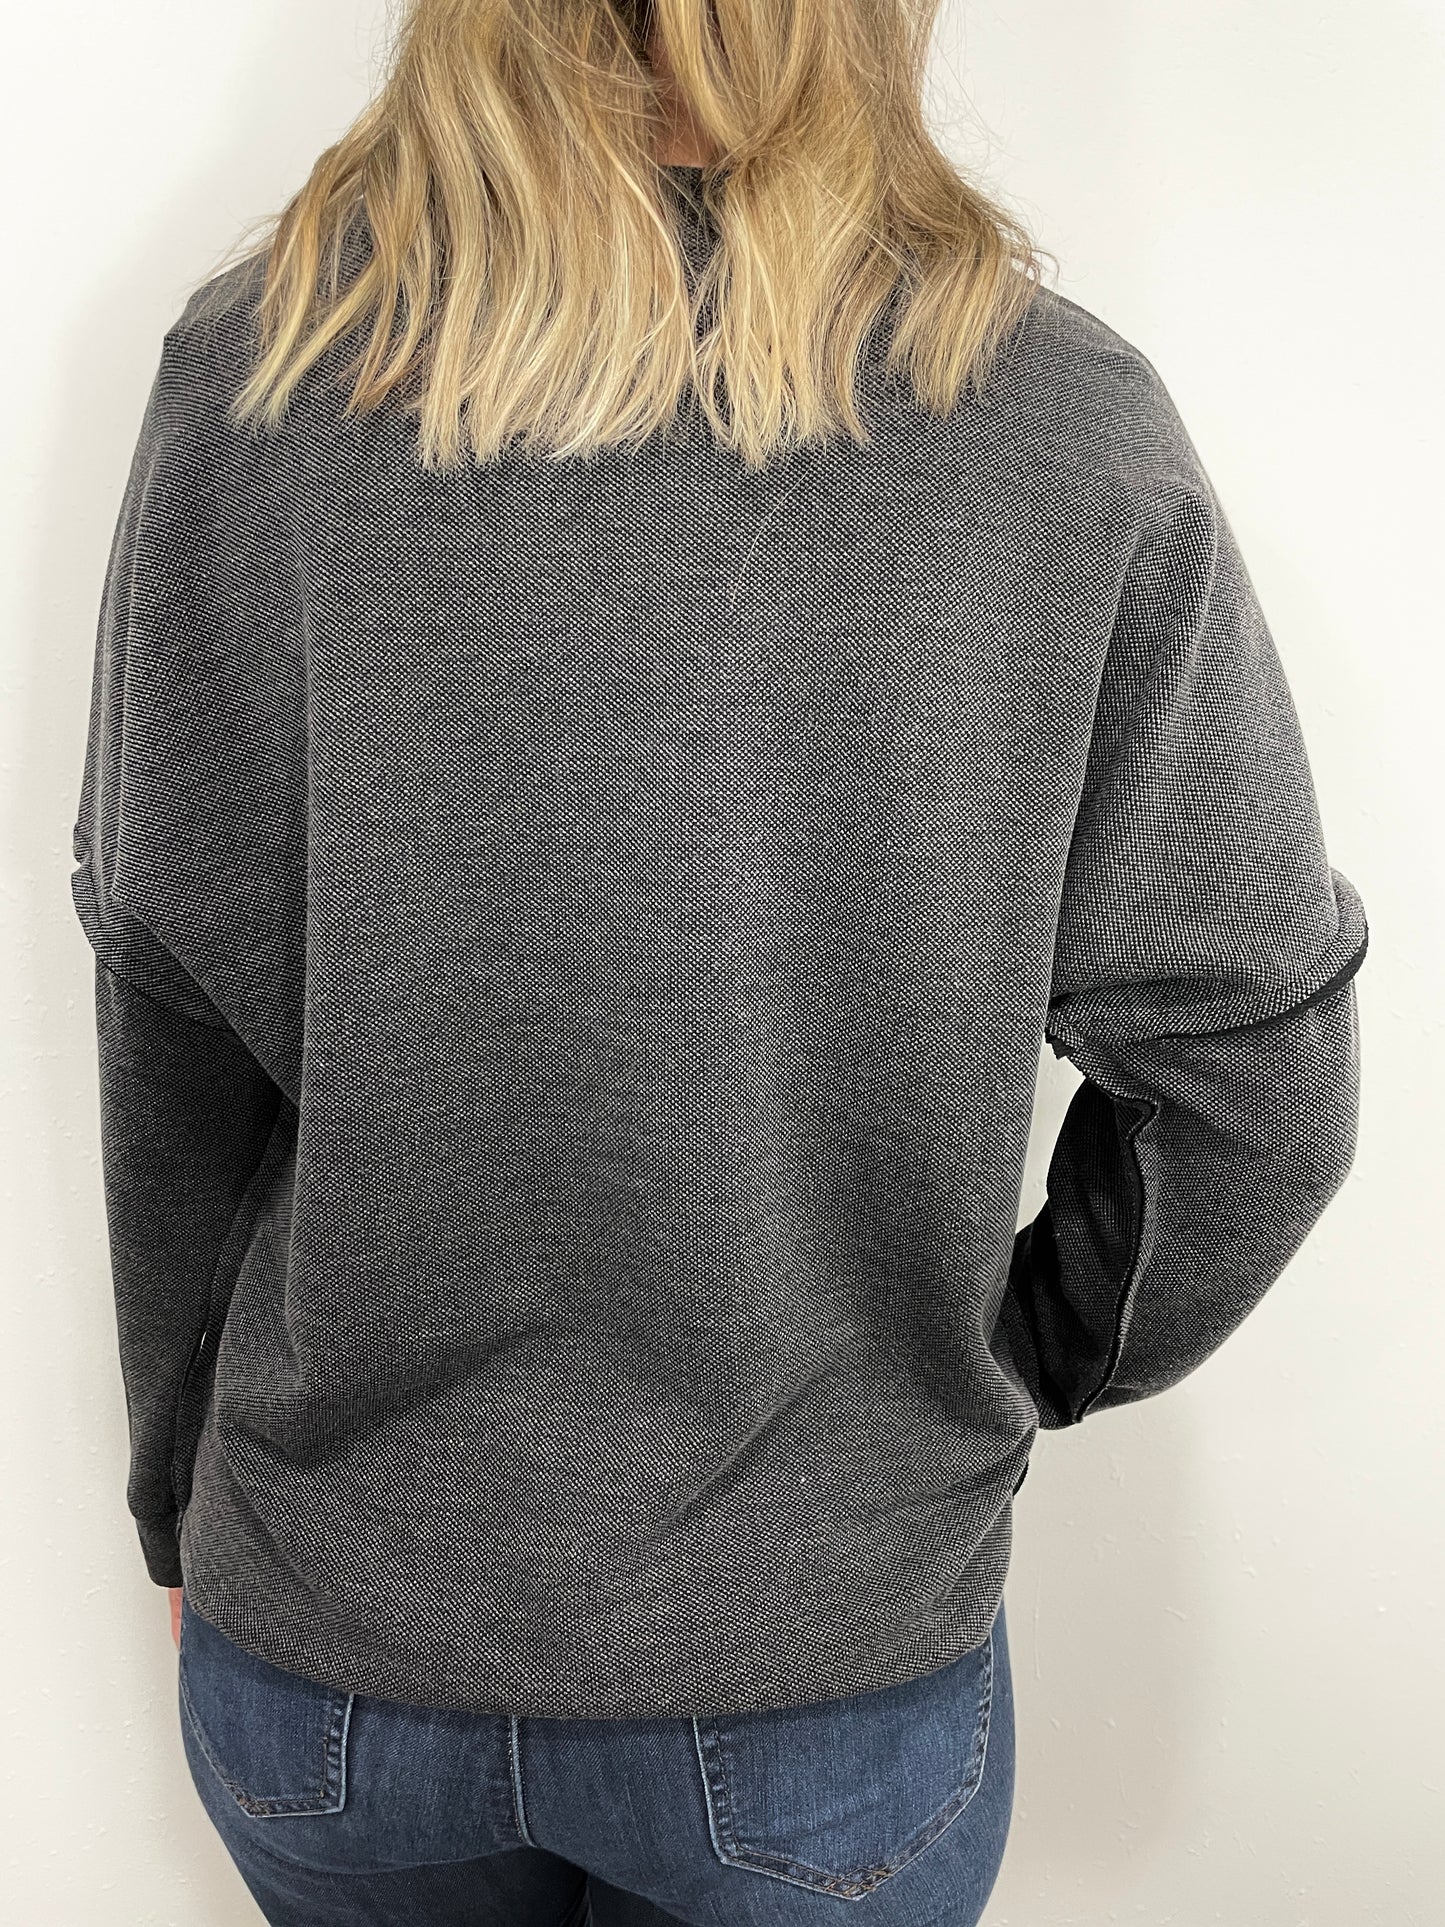 RAW EDGE DETAILED KNIT TOP - WASHED BLACK